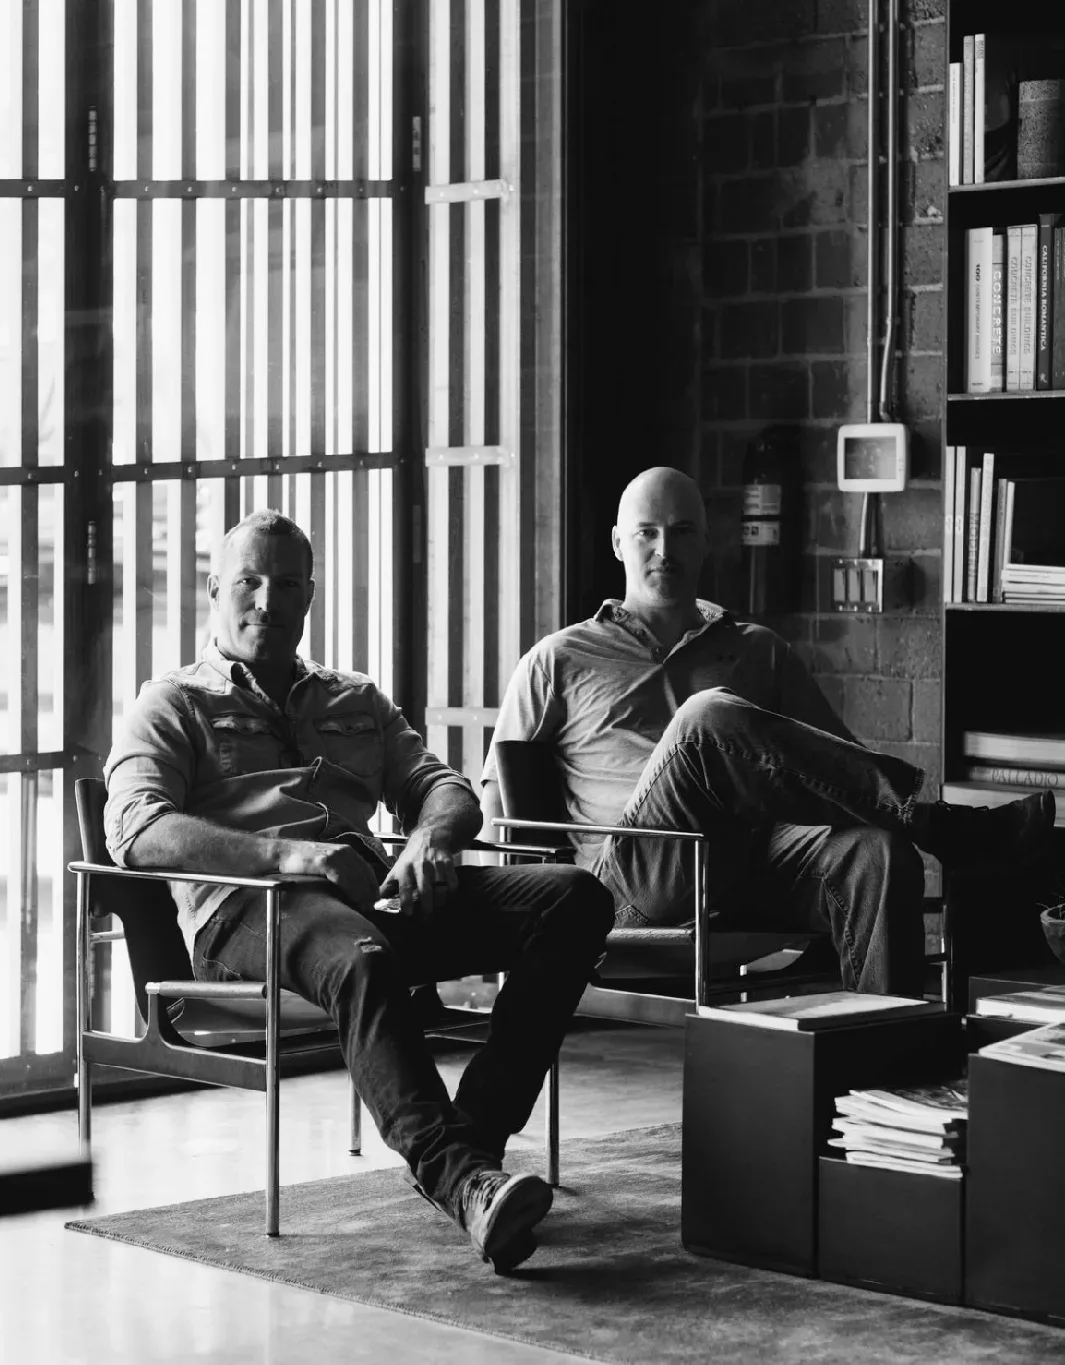 Two men sitting in chairs in front of a bookcase.